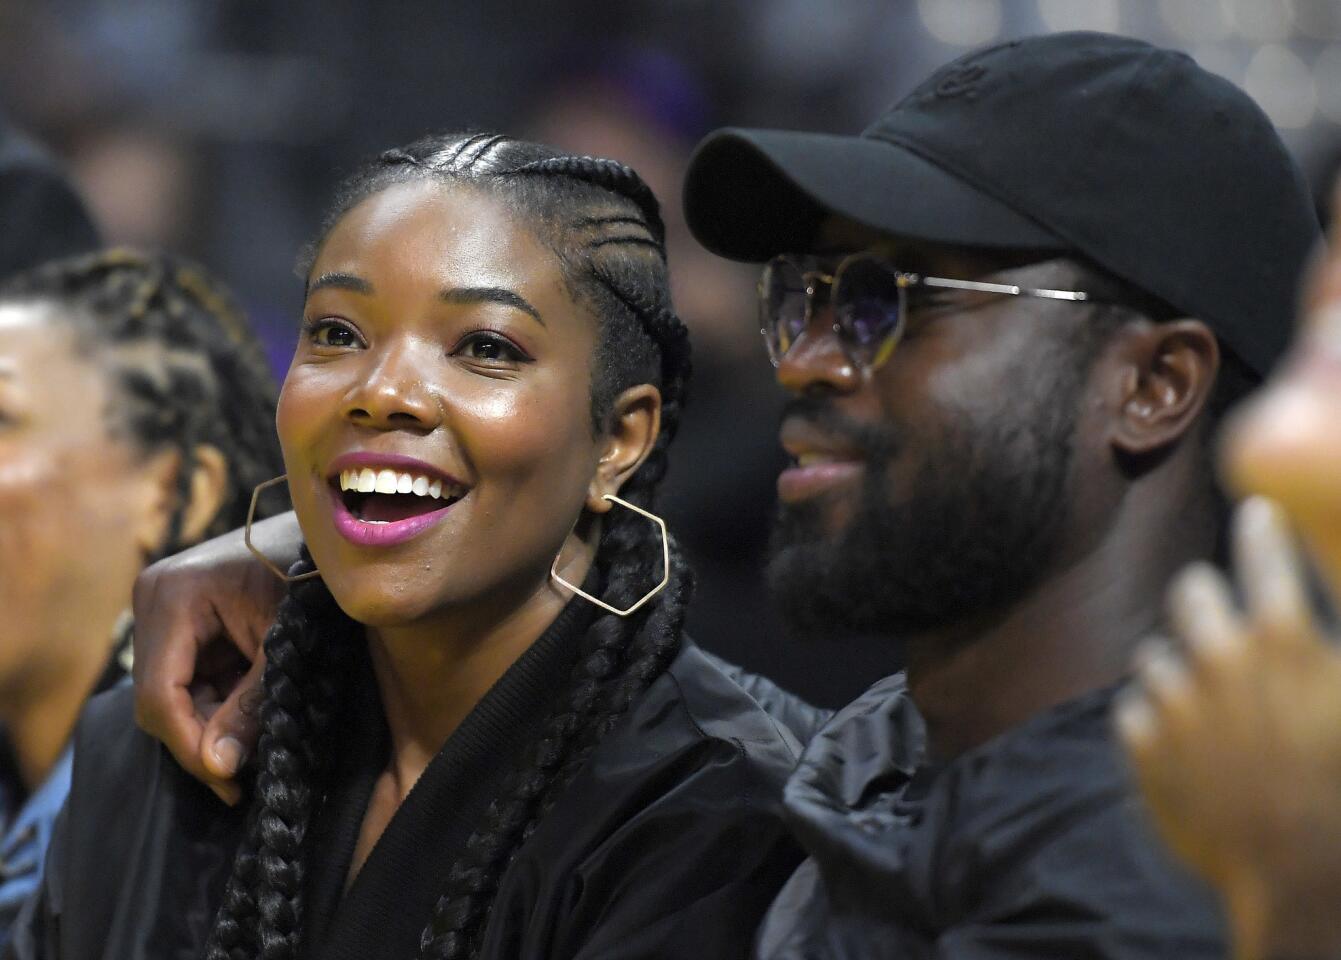 Chicago Bulls Dwyane Wade, right, watches with actress Gabrielle Union during the first half of a WNBA basketball game between the Los Angeles Sparks and the Atlanta Dream, Friday, Sept. 1, 2017, in Los Angeles. (AP Photo/Mark J. Terrill)